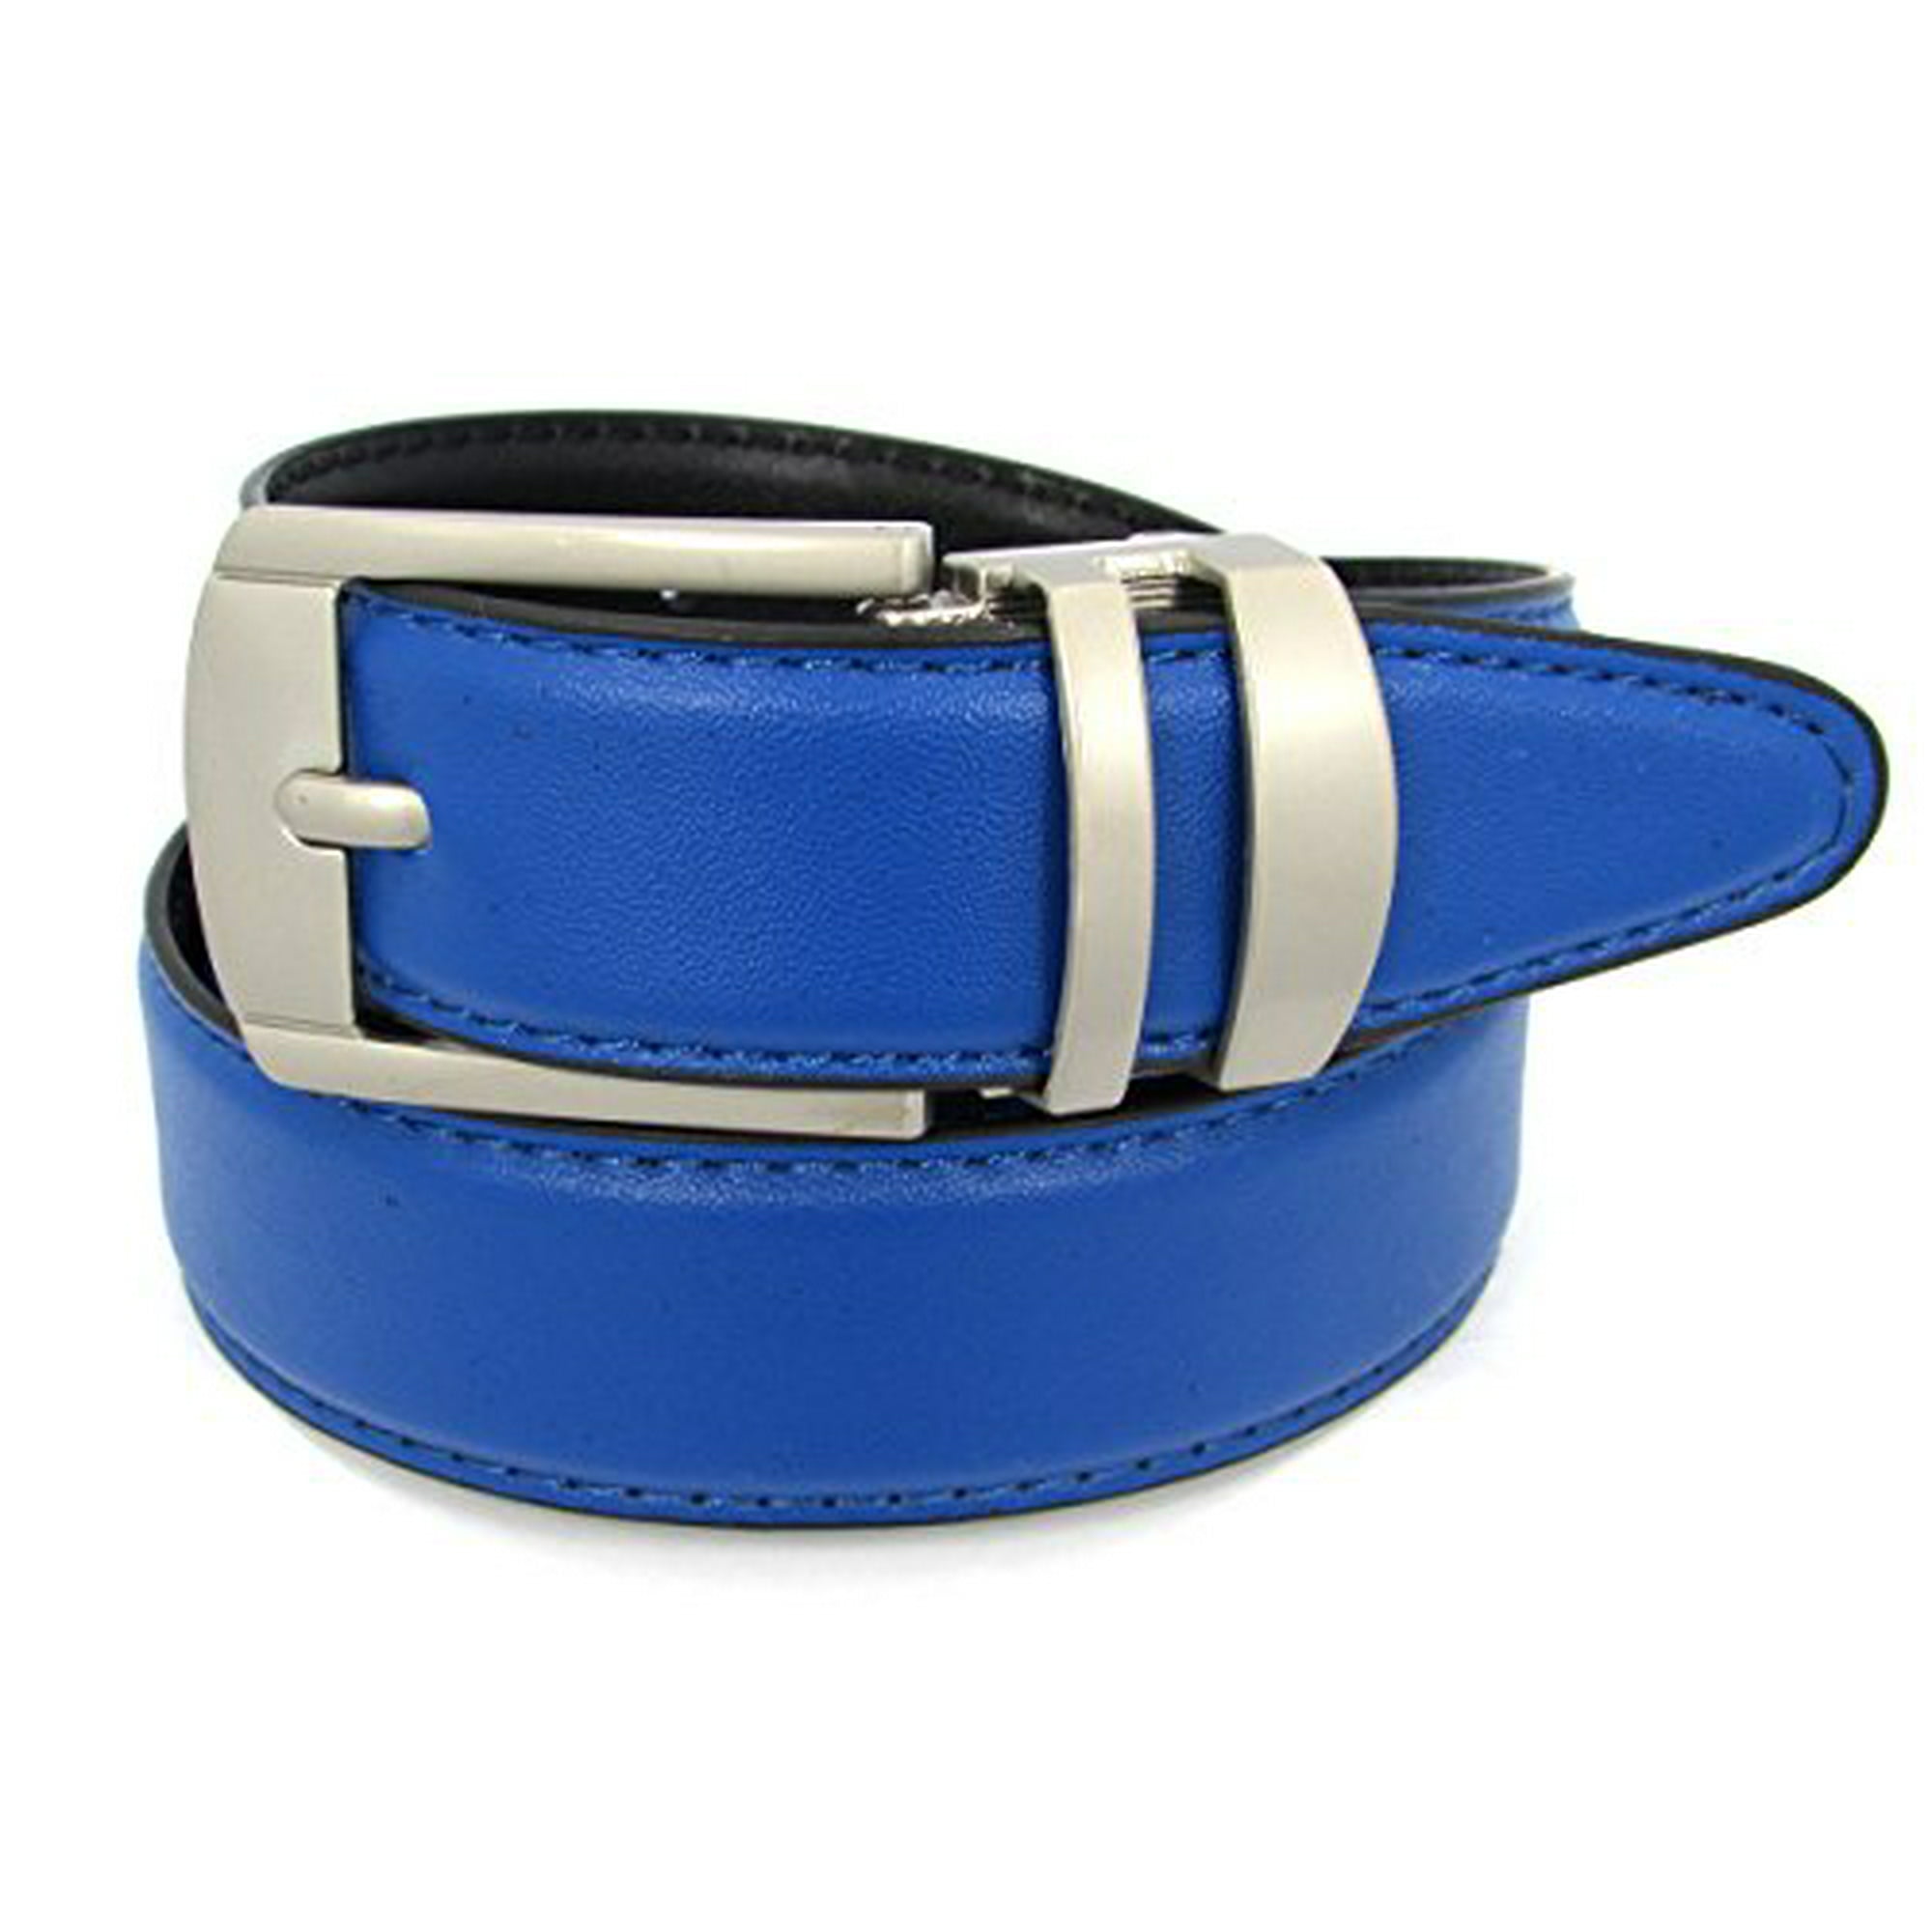 30mm reversible belt with